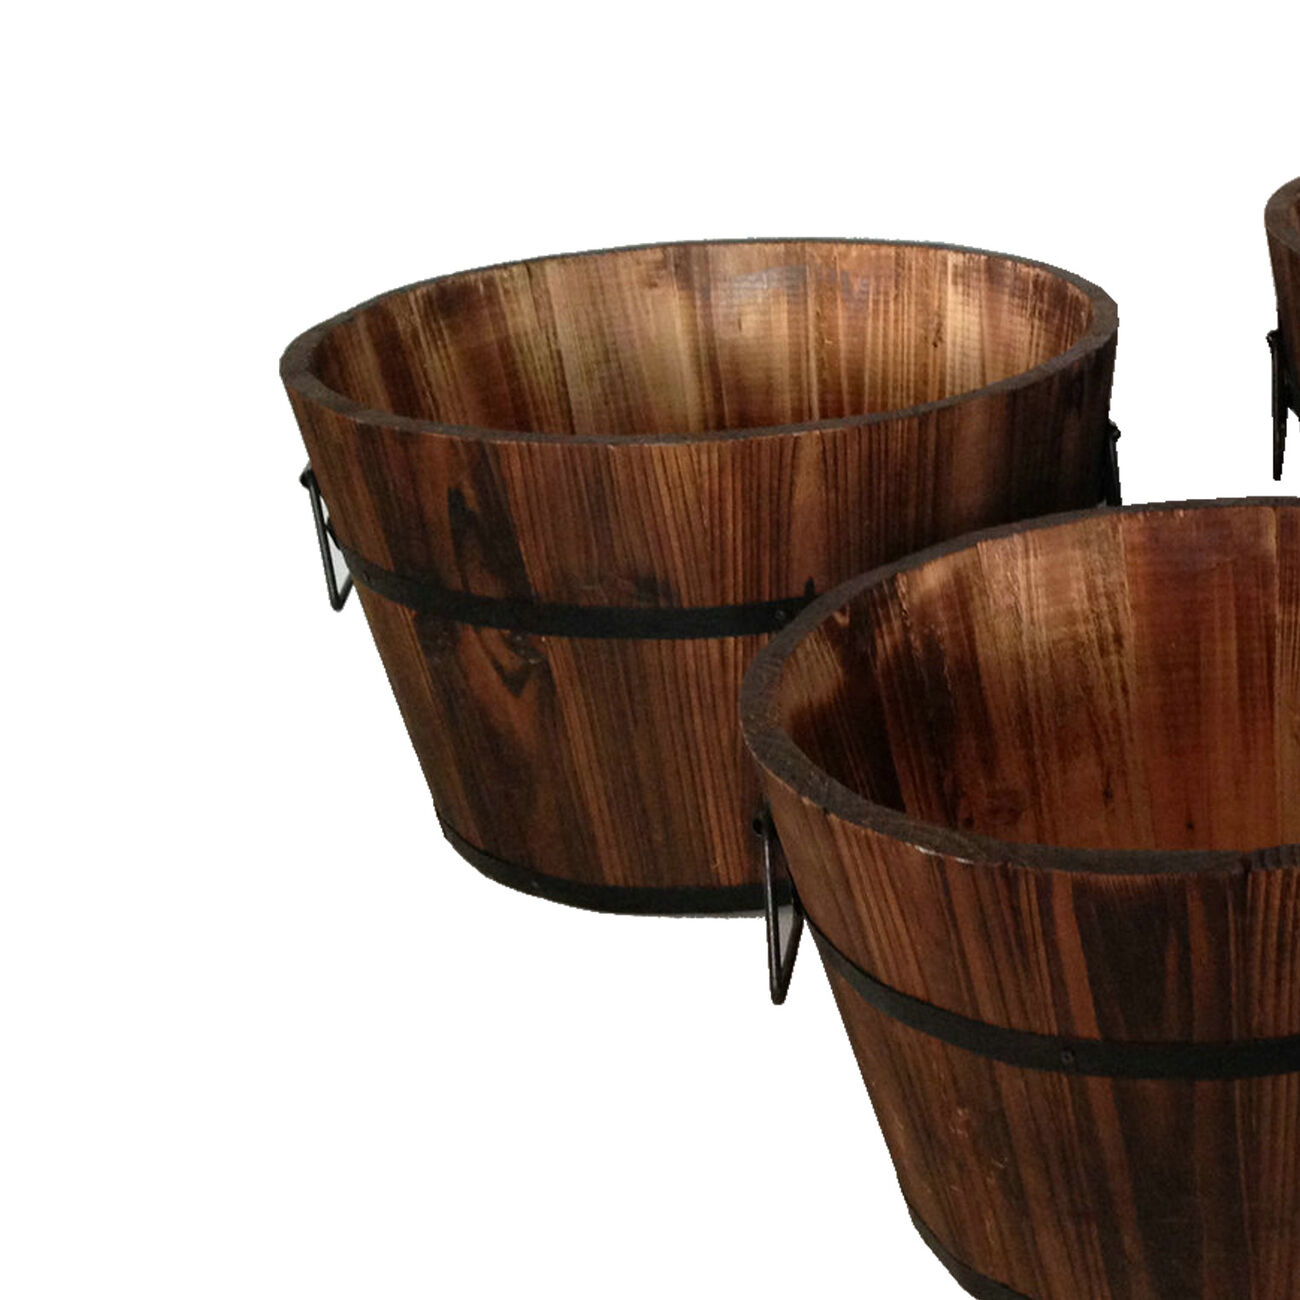 Round Wooden Planters with Narrow Bottom and Handles, Set of 3, Brown